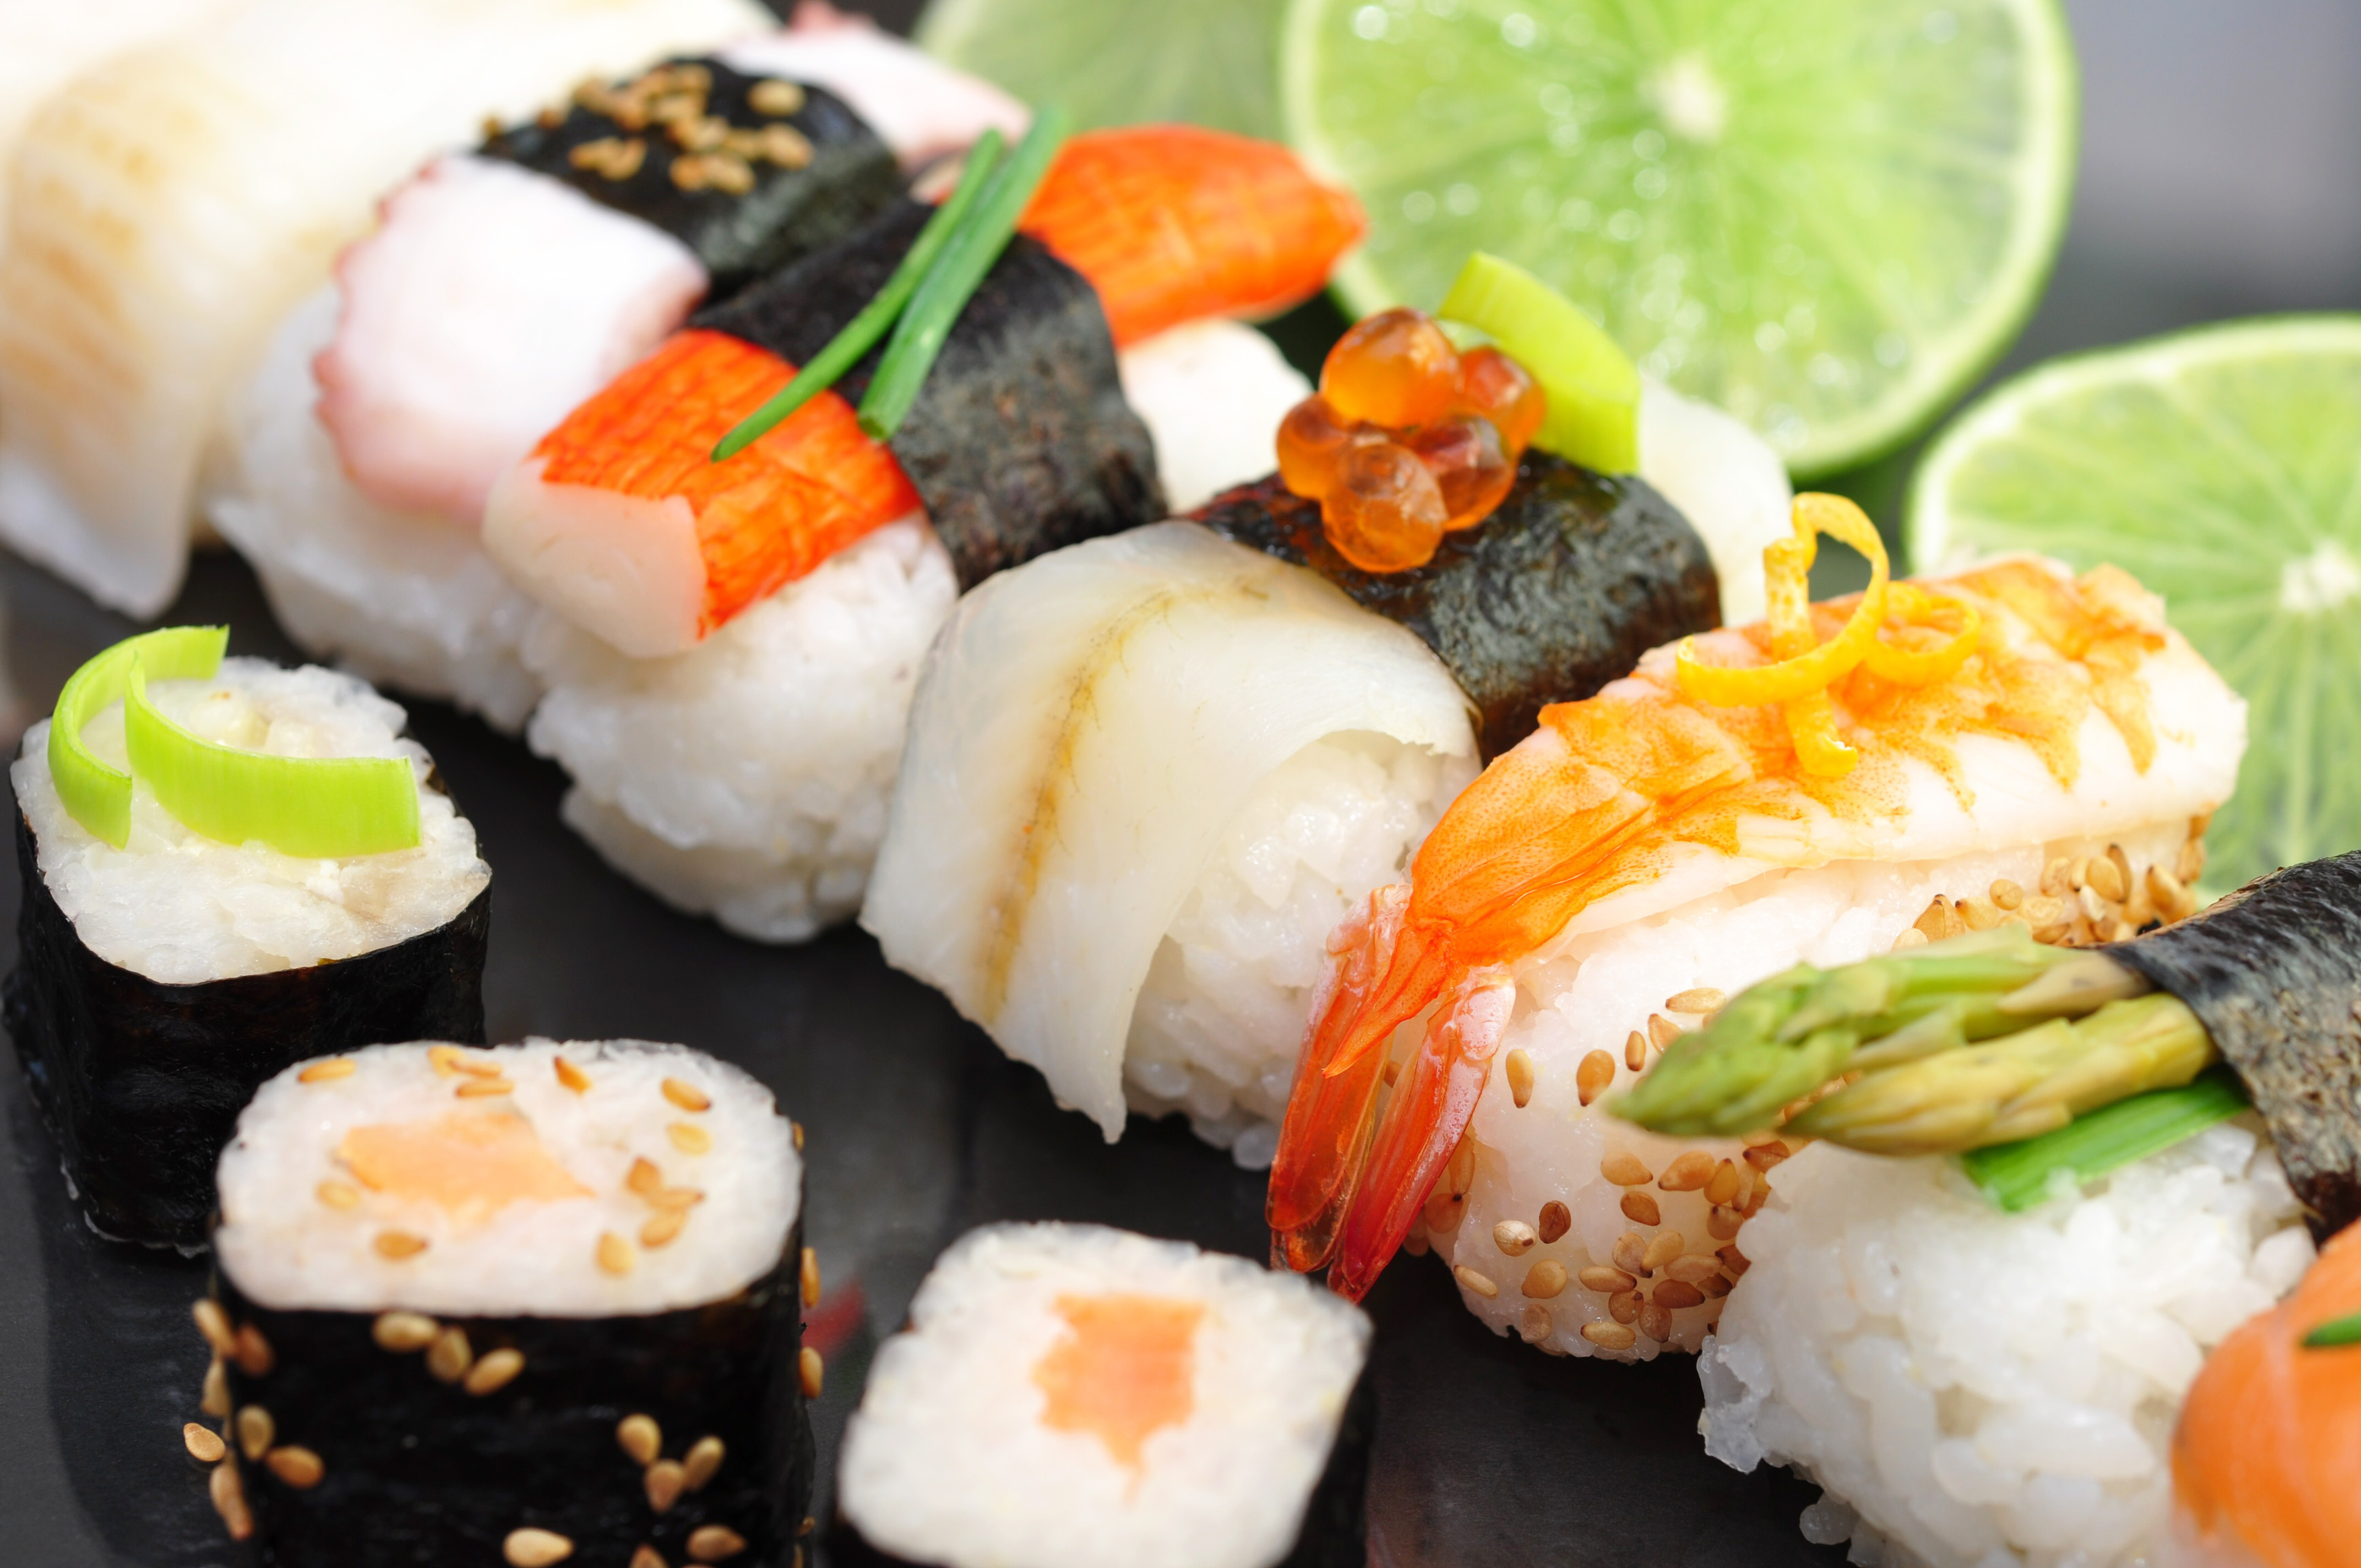 Sushi 4k Ultra HD Wallpaper and Background Image | 4288x2848 | ID:346321